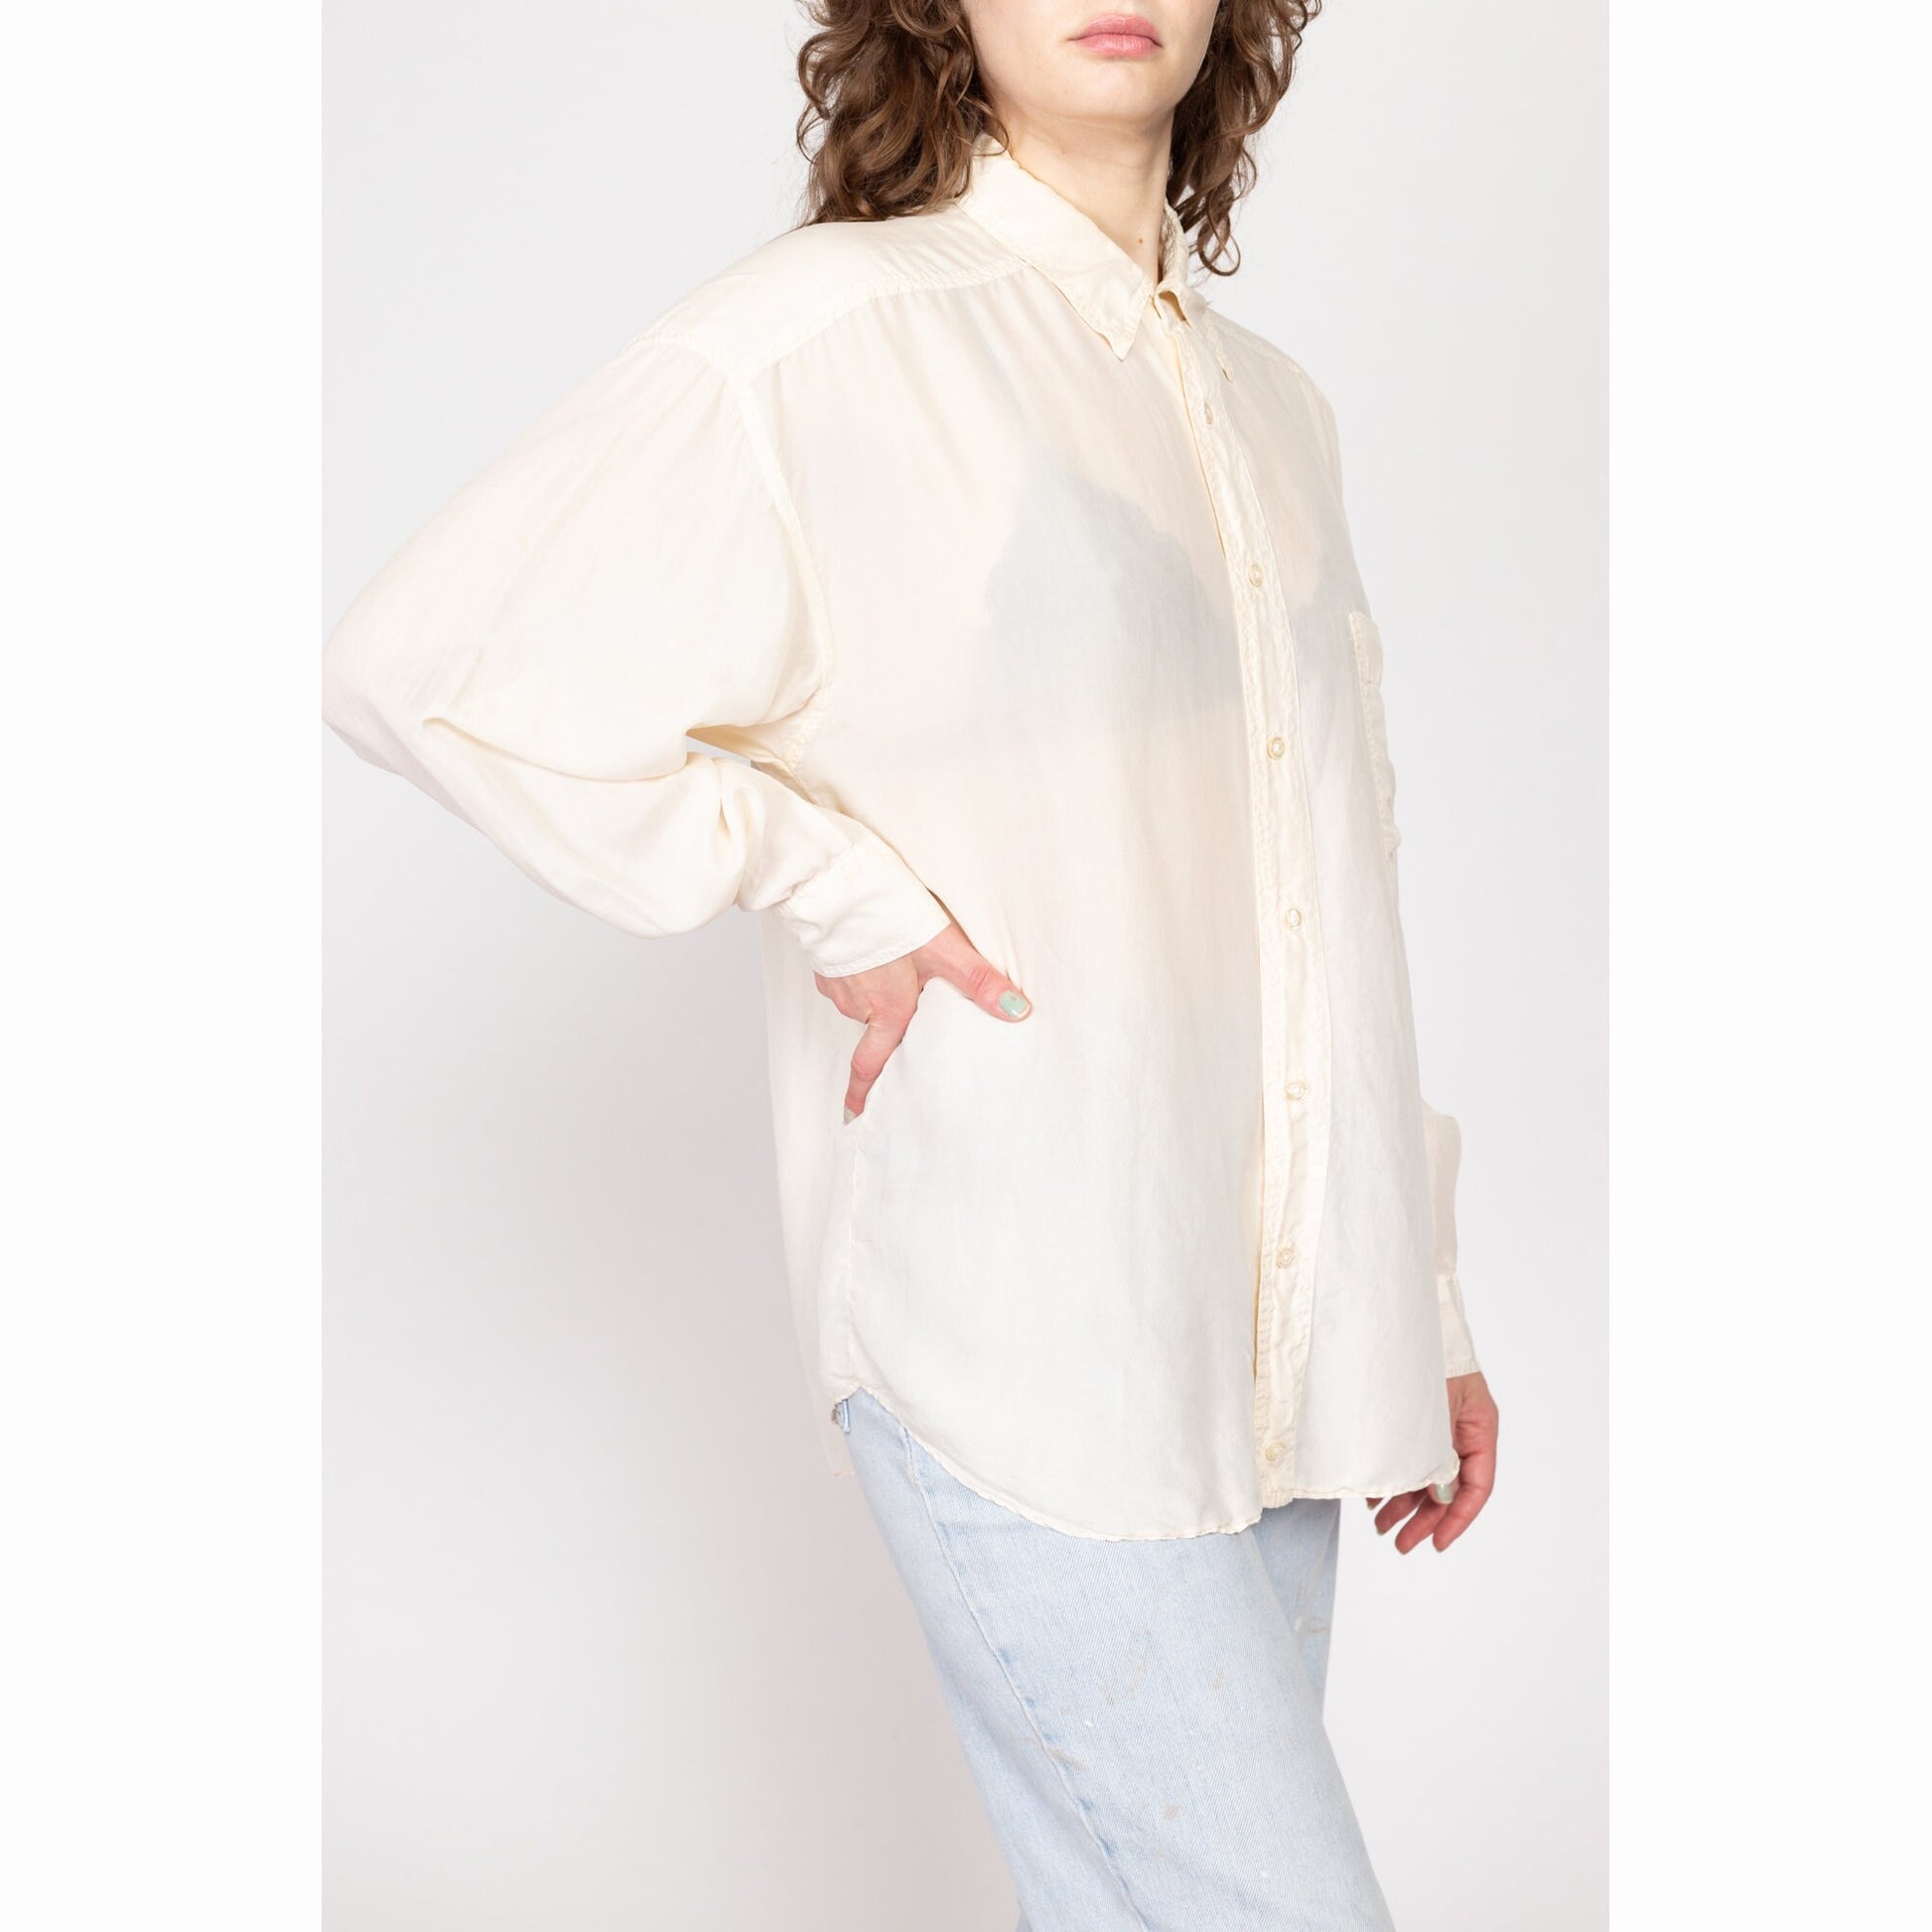 Med-XL 90s Ivory Silk Blouse | Vintage Minimalist Long Sleeve Button Up Collared Shirt